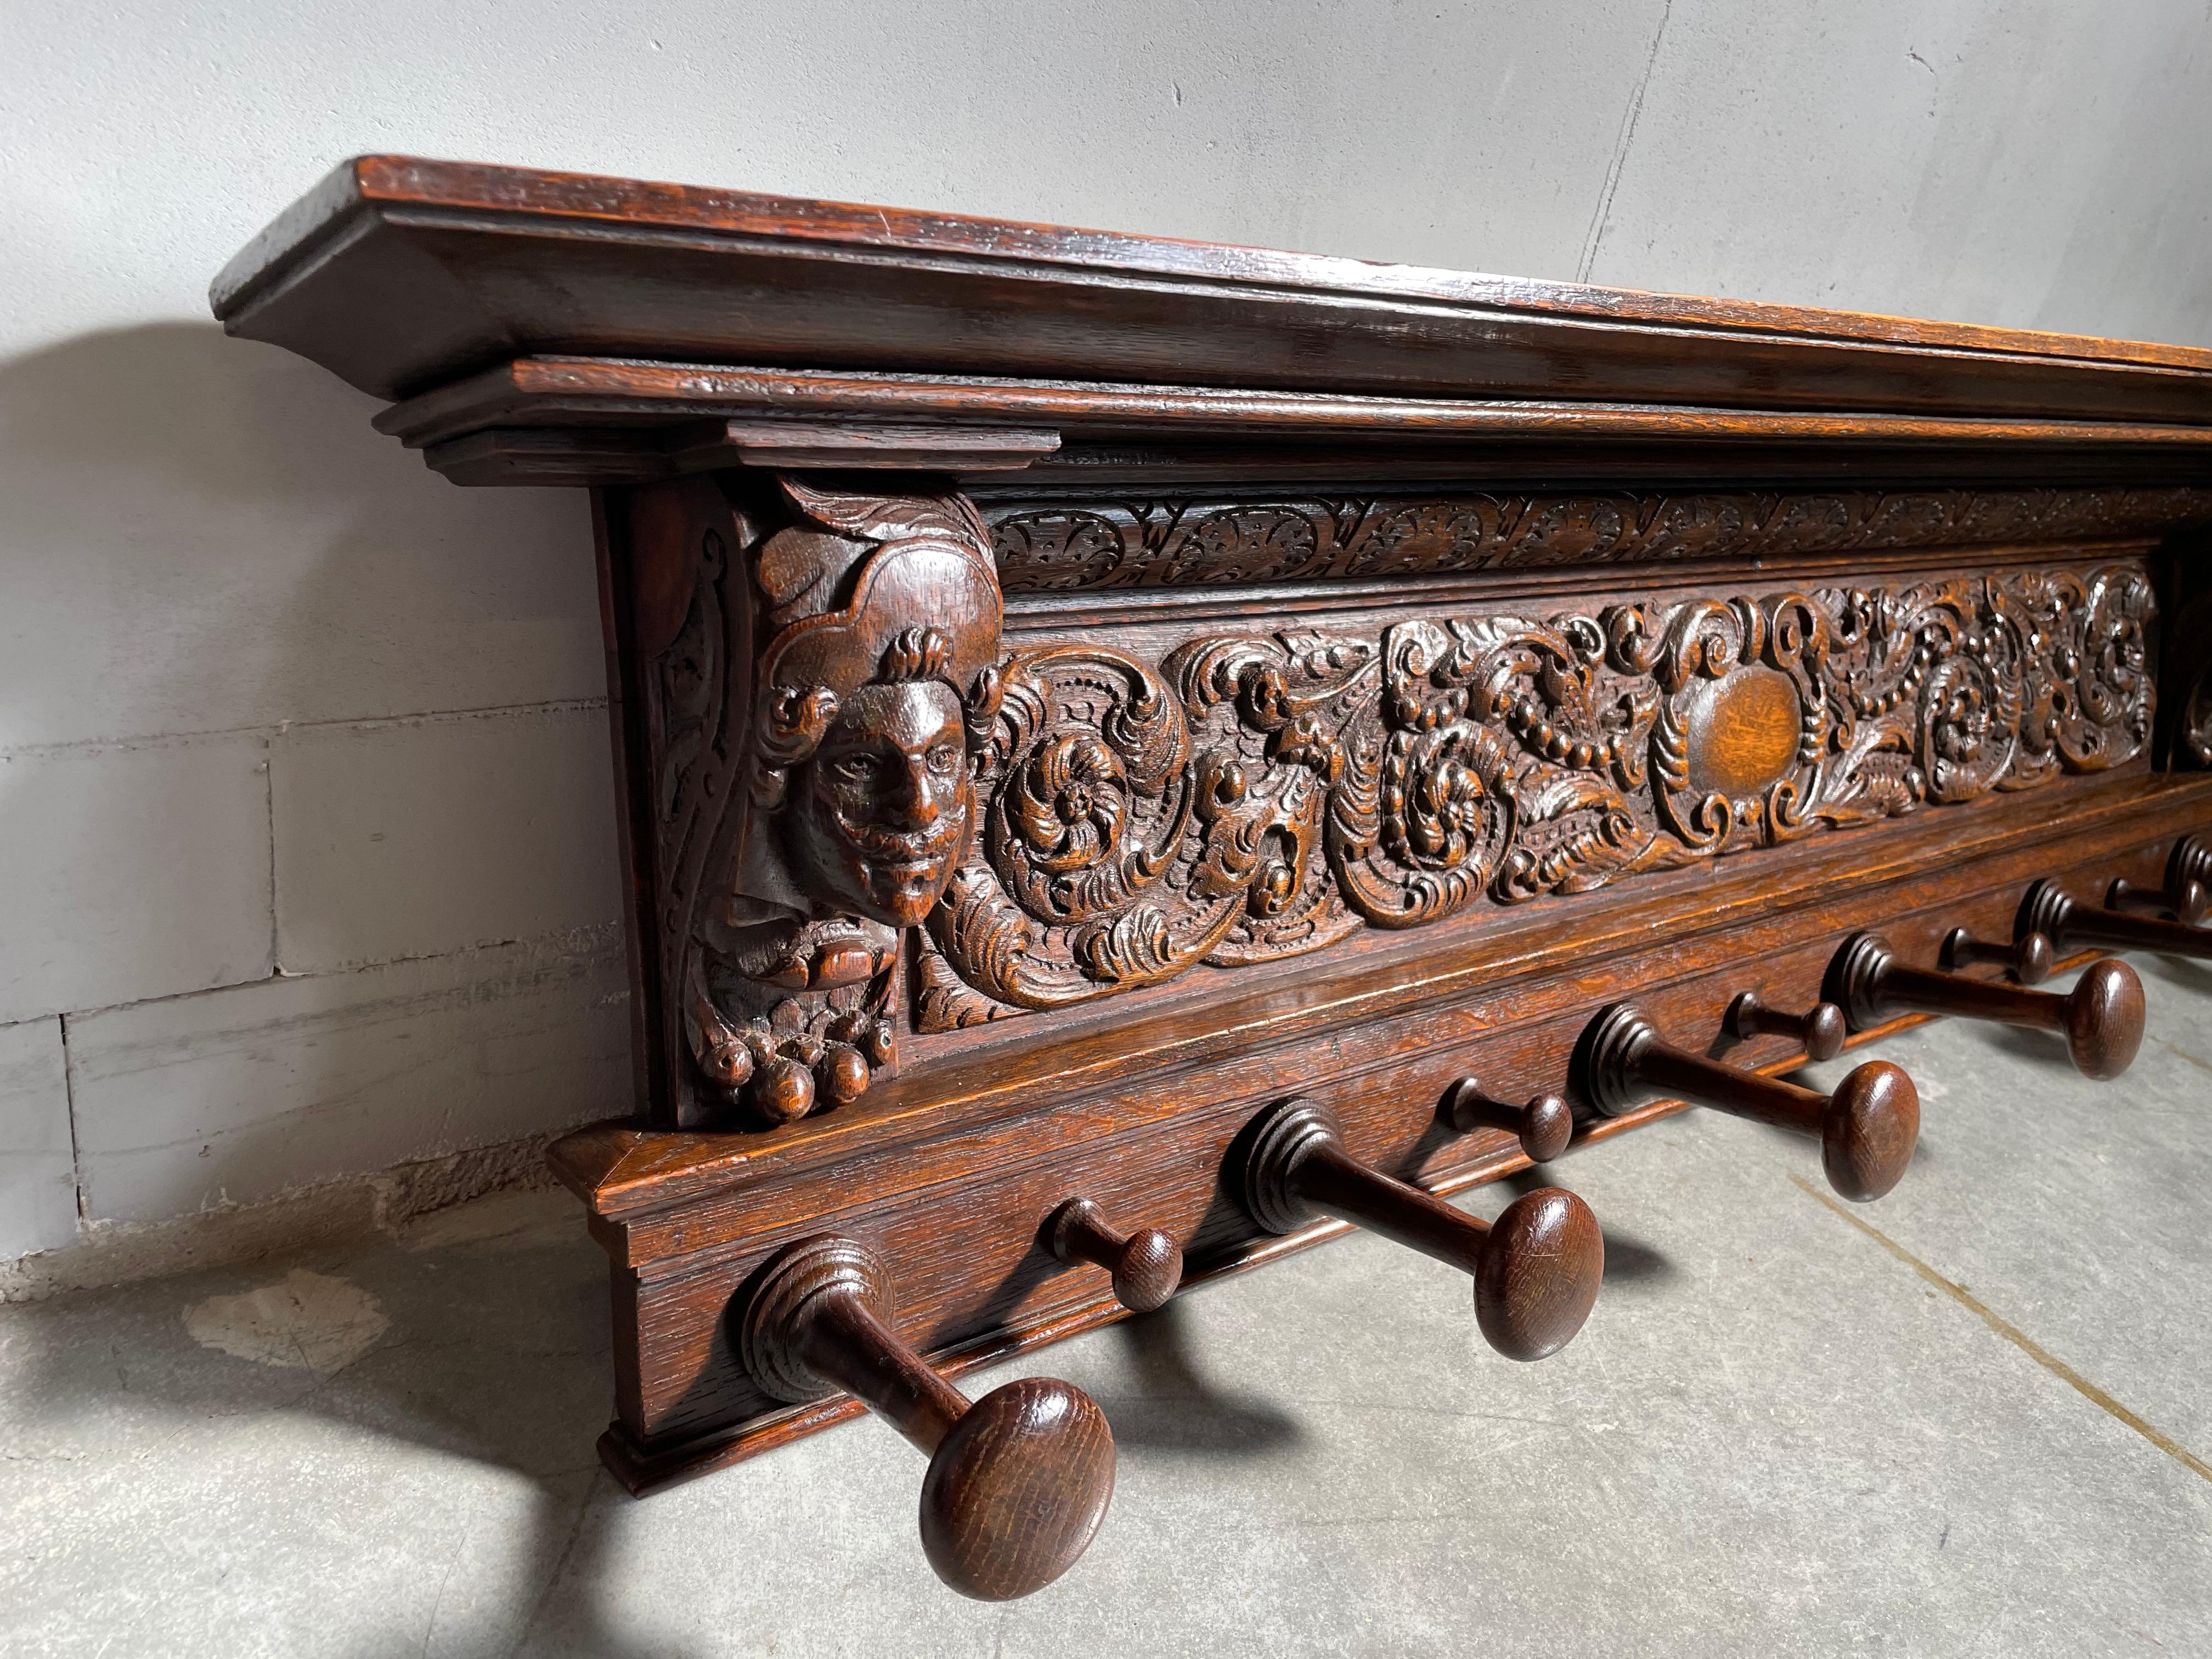 Stunning, solid oak Dutch Renaissance Revival coat and hat rack with noble men or merchant carvings.

We all know how important first impressions are and with this stunning 19th century coat rack you will never fail to impress anyone entering your